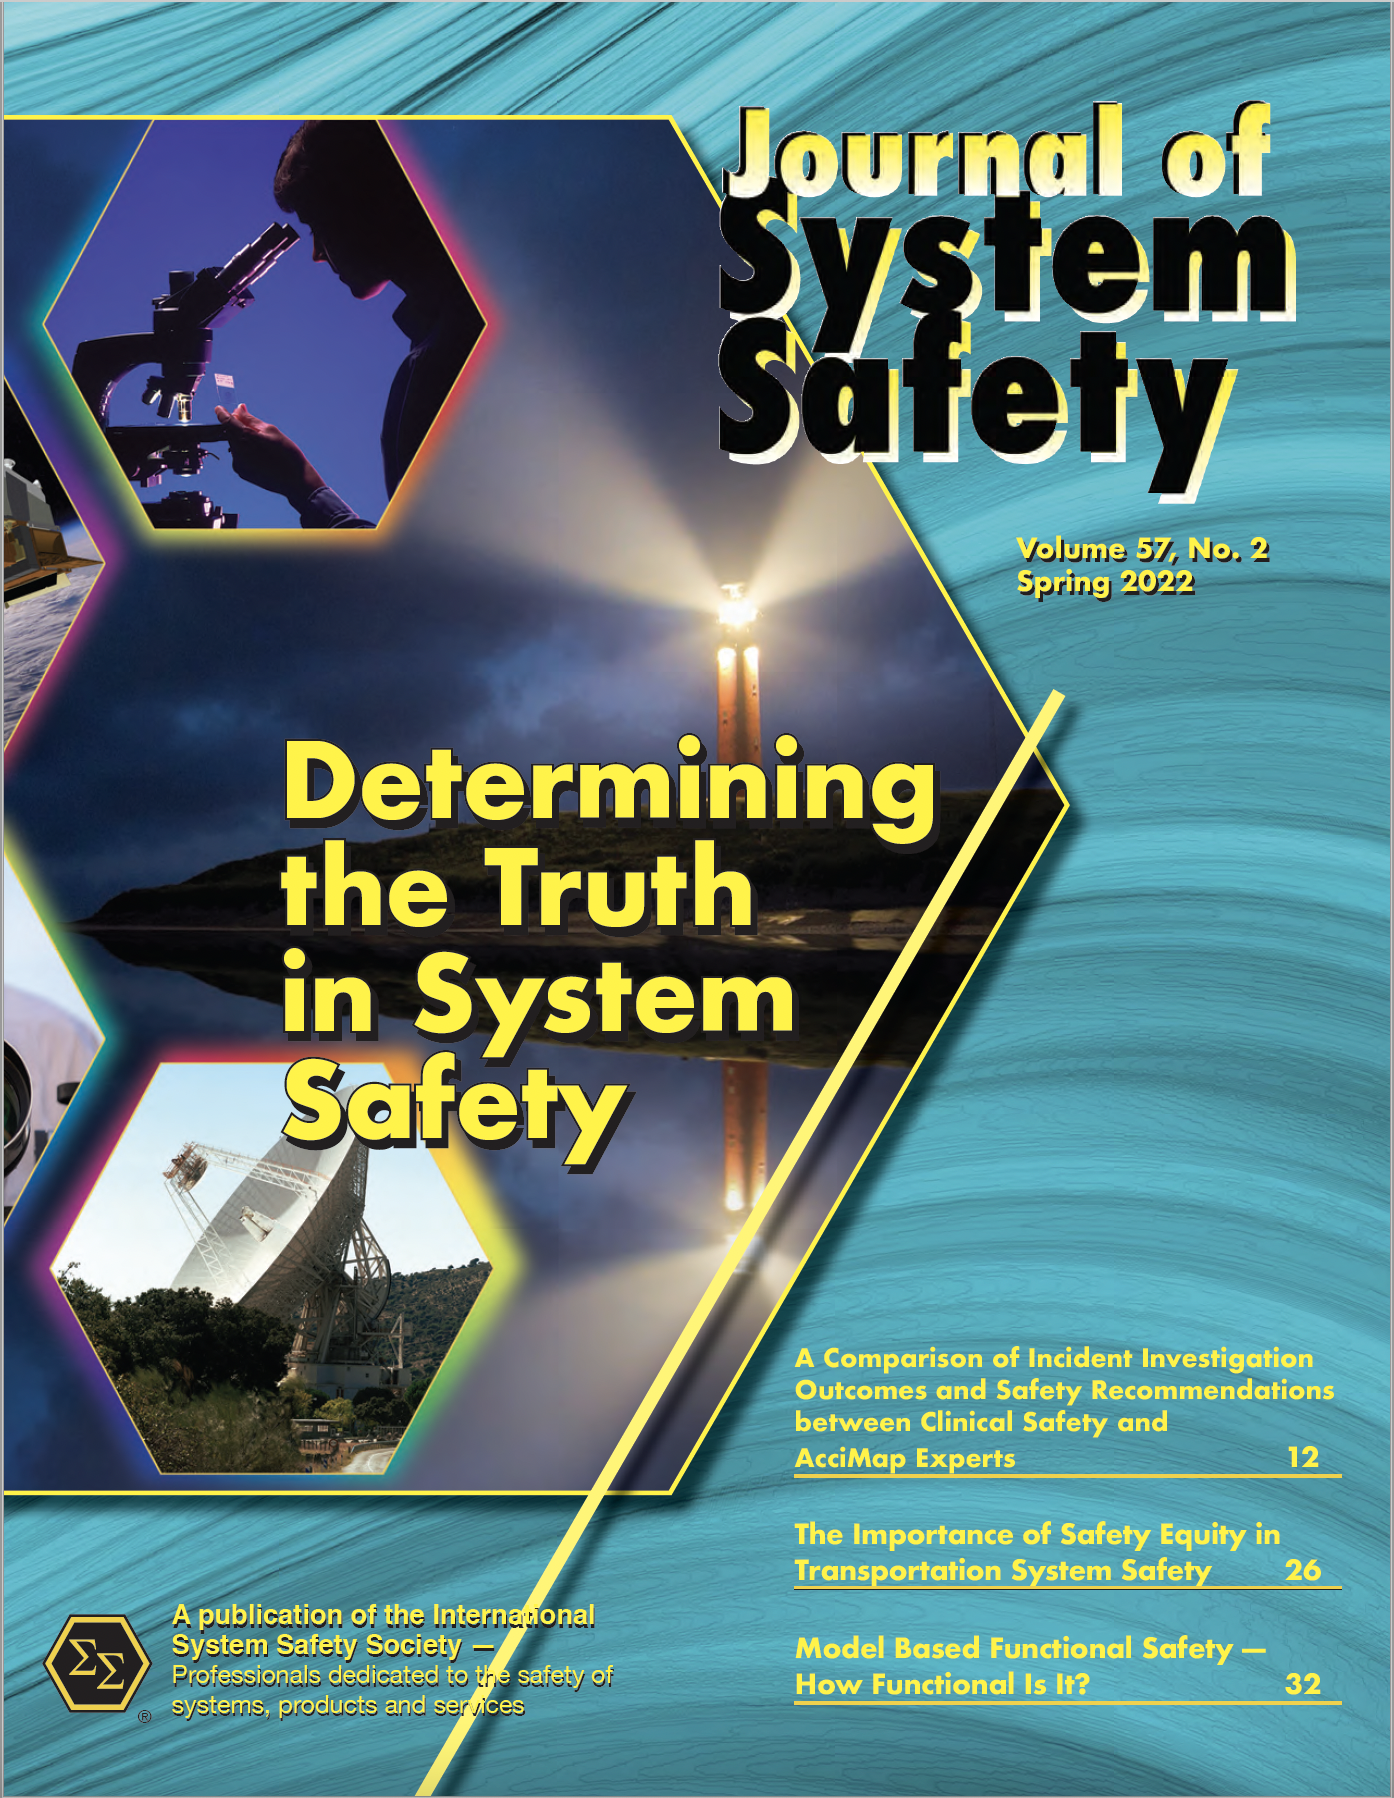 Journal of System Safety, Spring 2022